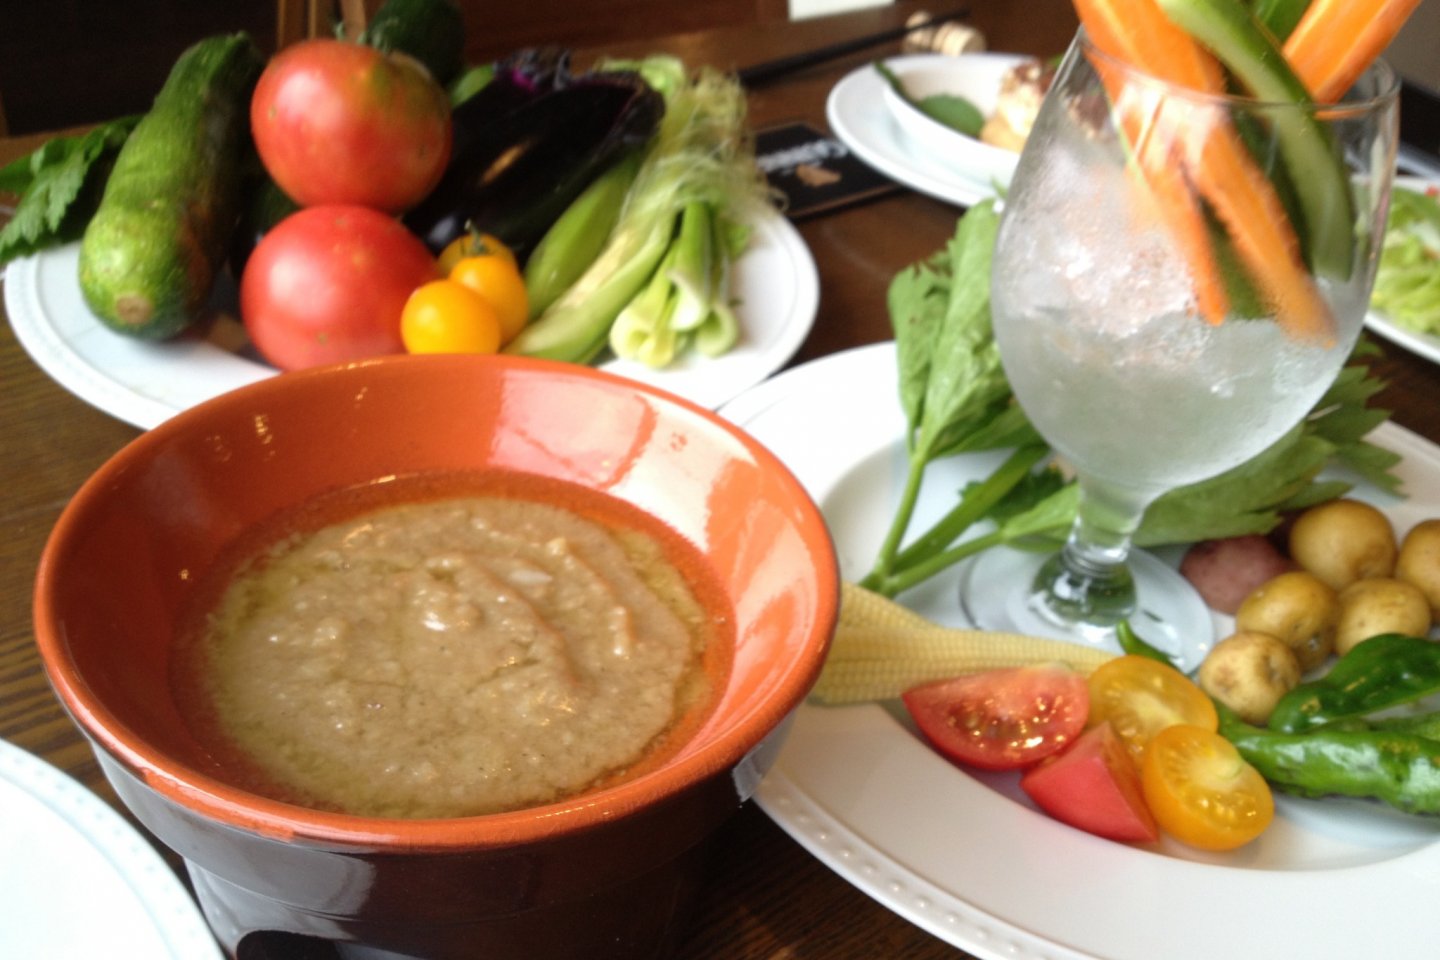 Seasonal vegetables are blended together to make this exquisite bagna cauda (dip made from garlic, anchovies and oil).